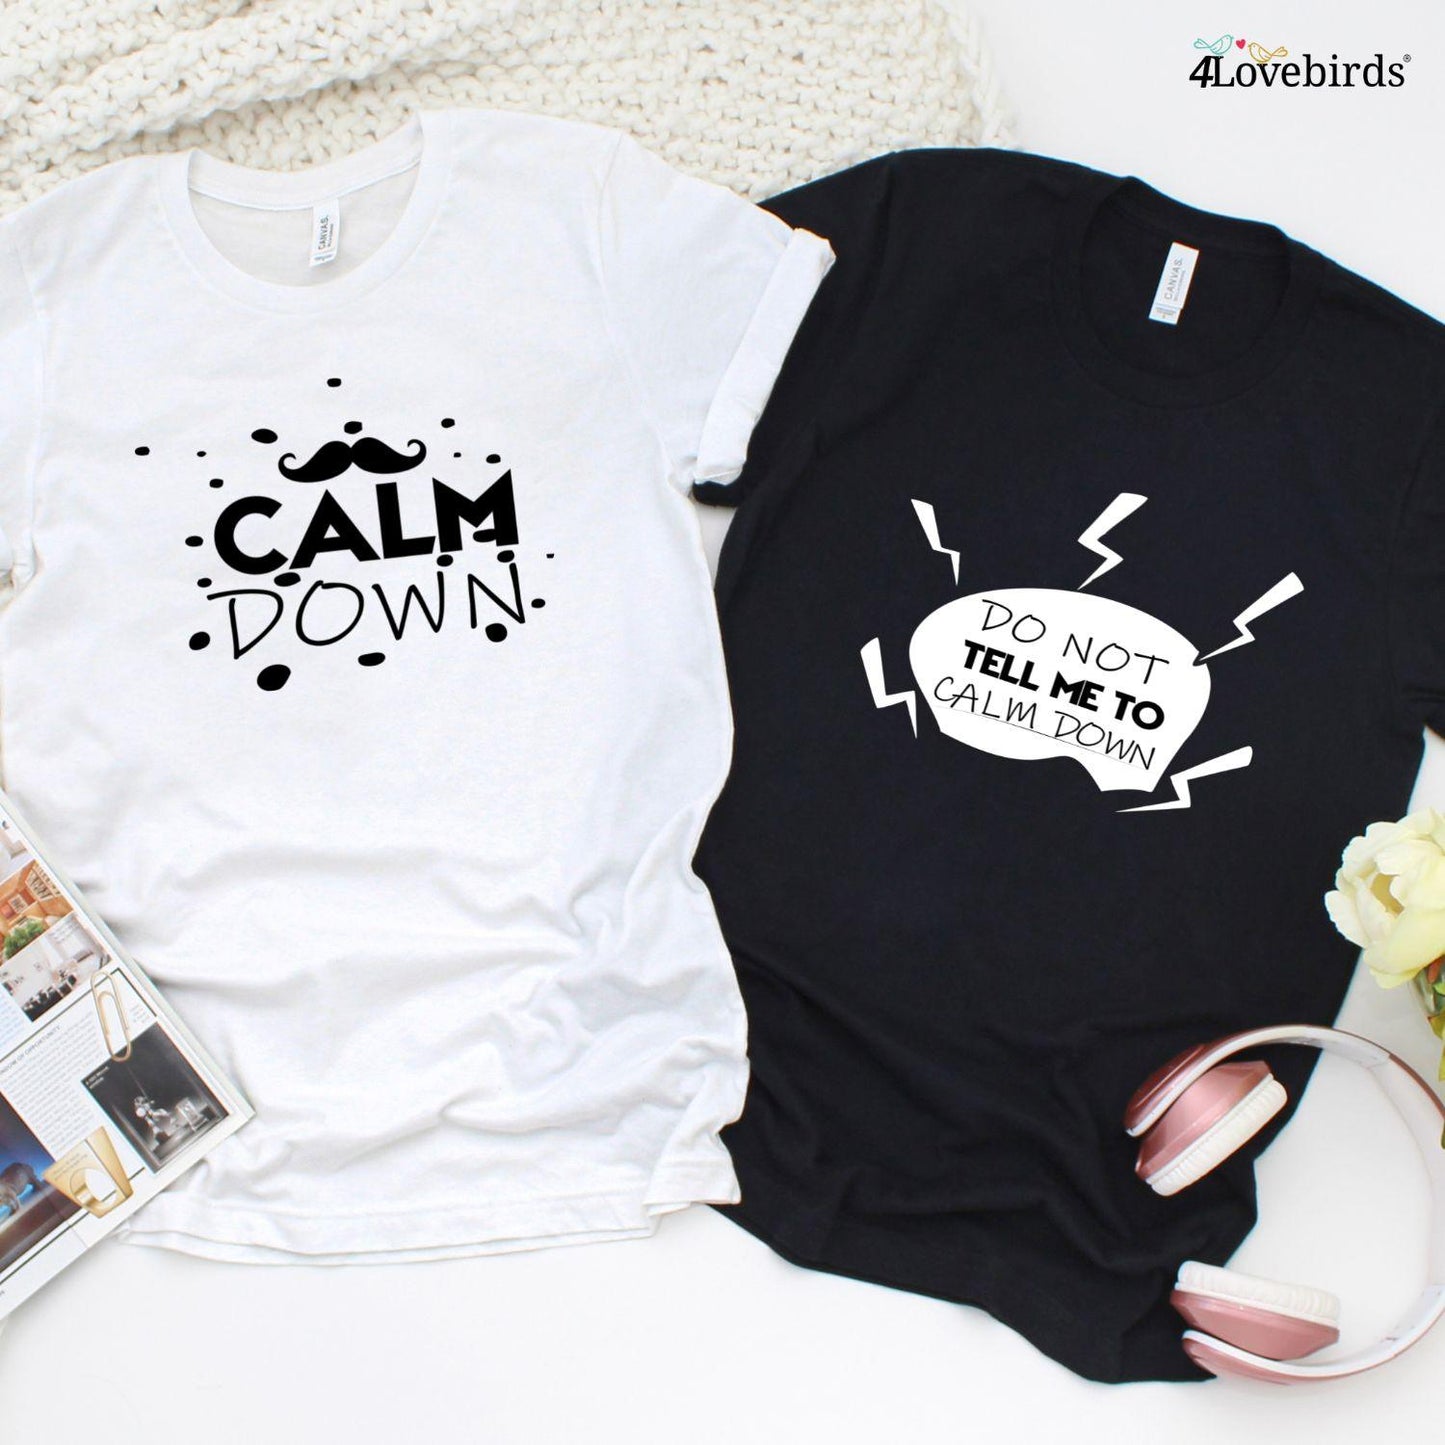 Funny Matching Set for Couples - Husband & Wife Outfits - His & Hers Tees - Calm Down! - 4Lovebirds